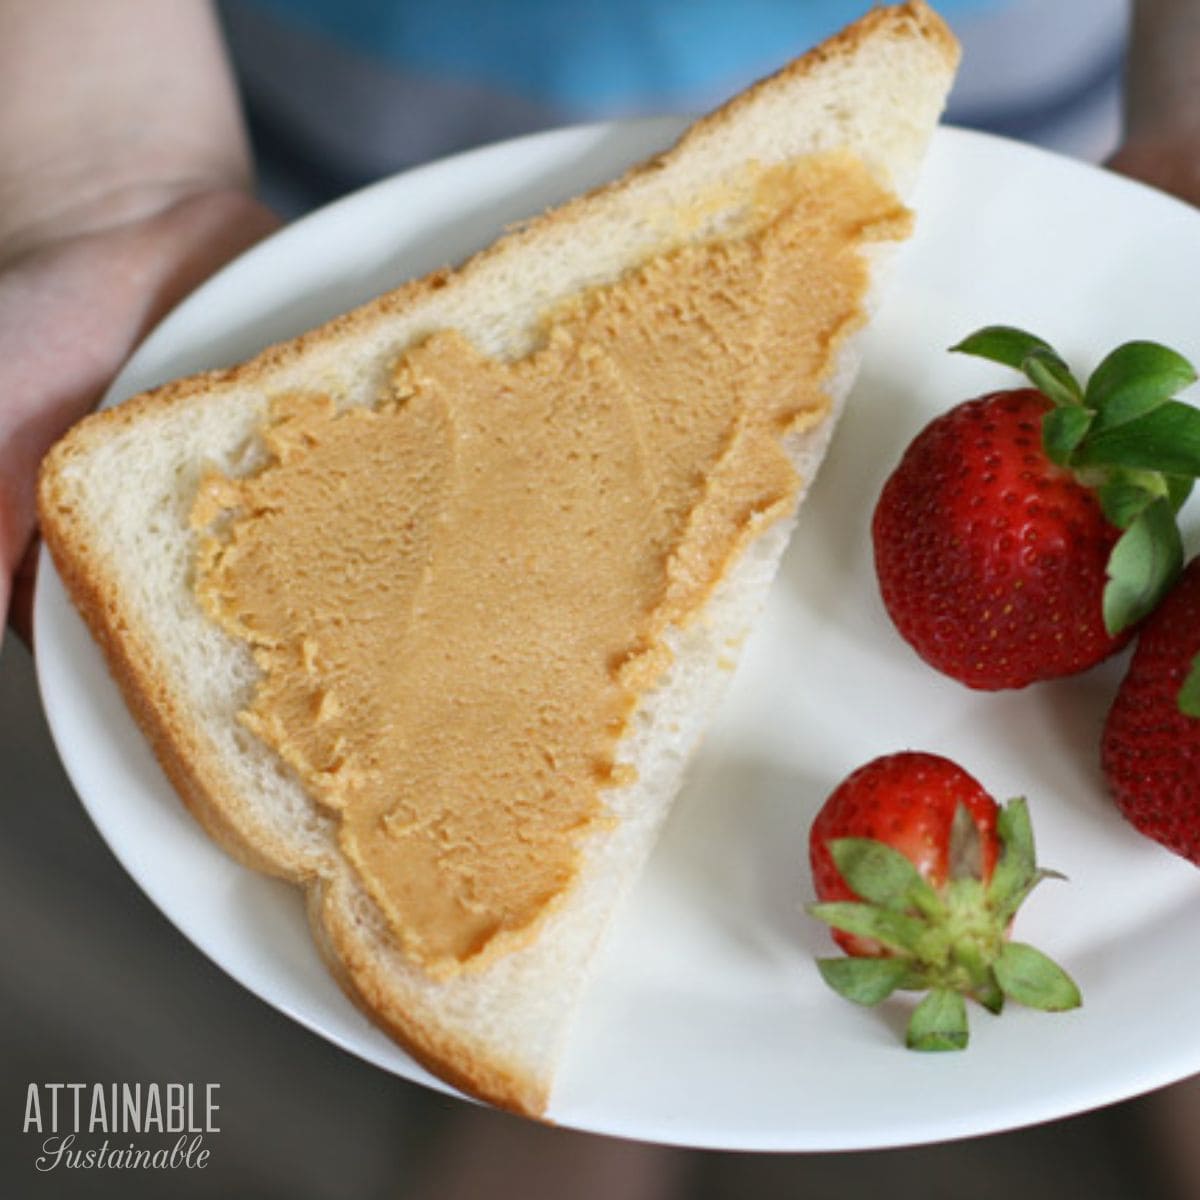 homemade peanut butter on a slice of bread with strawberries on a white plate.